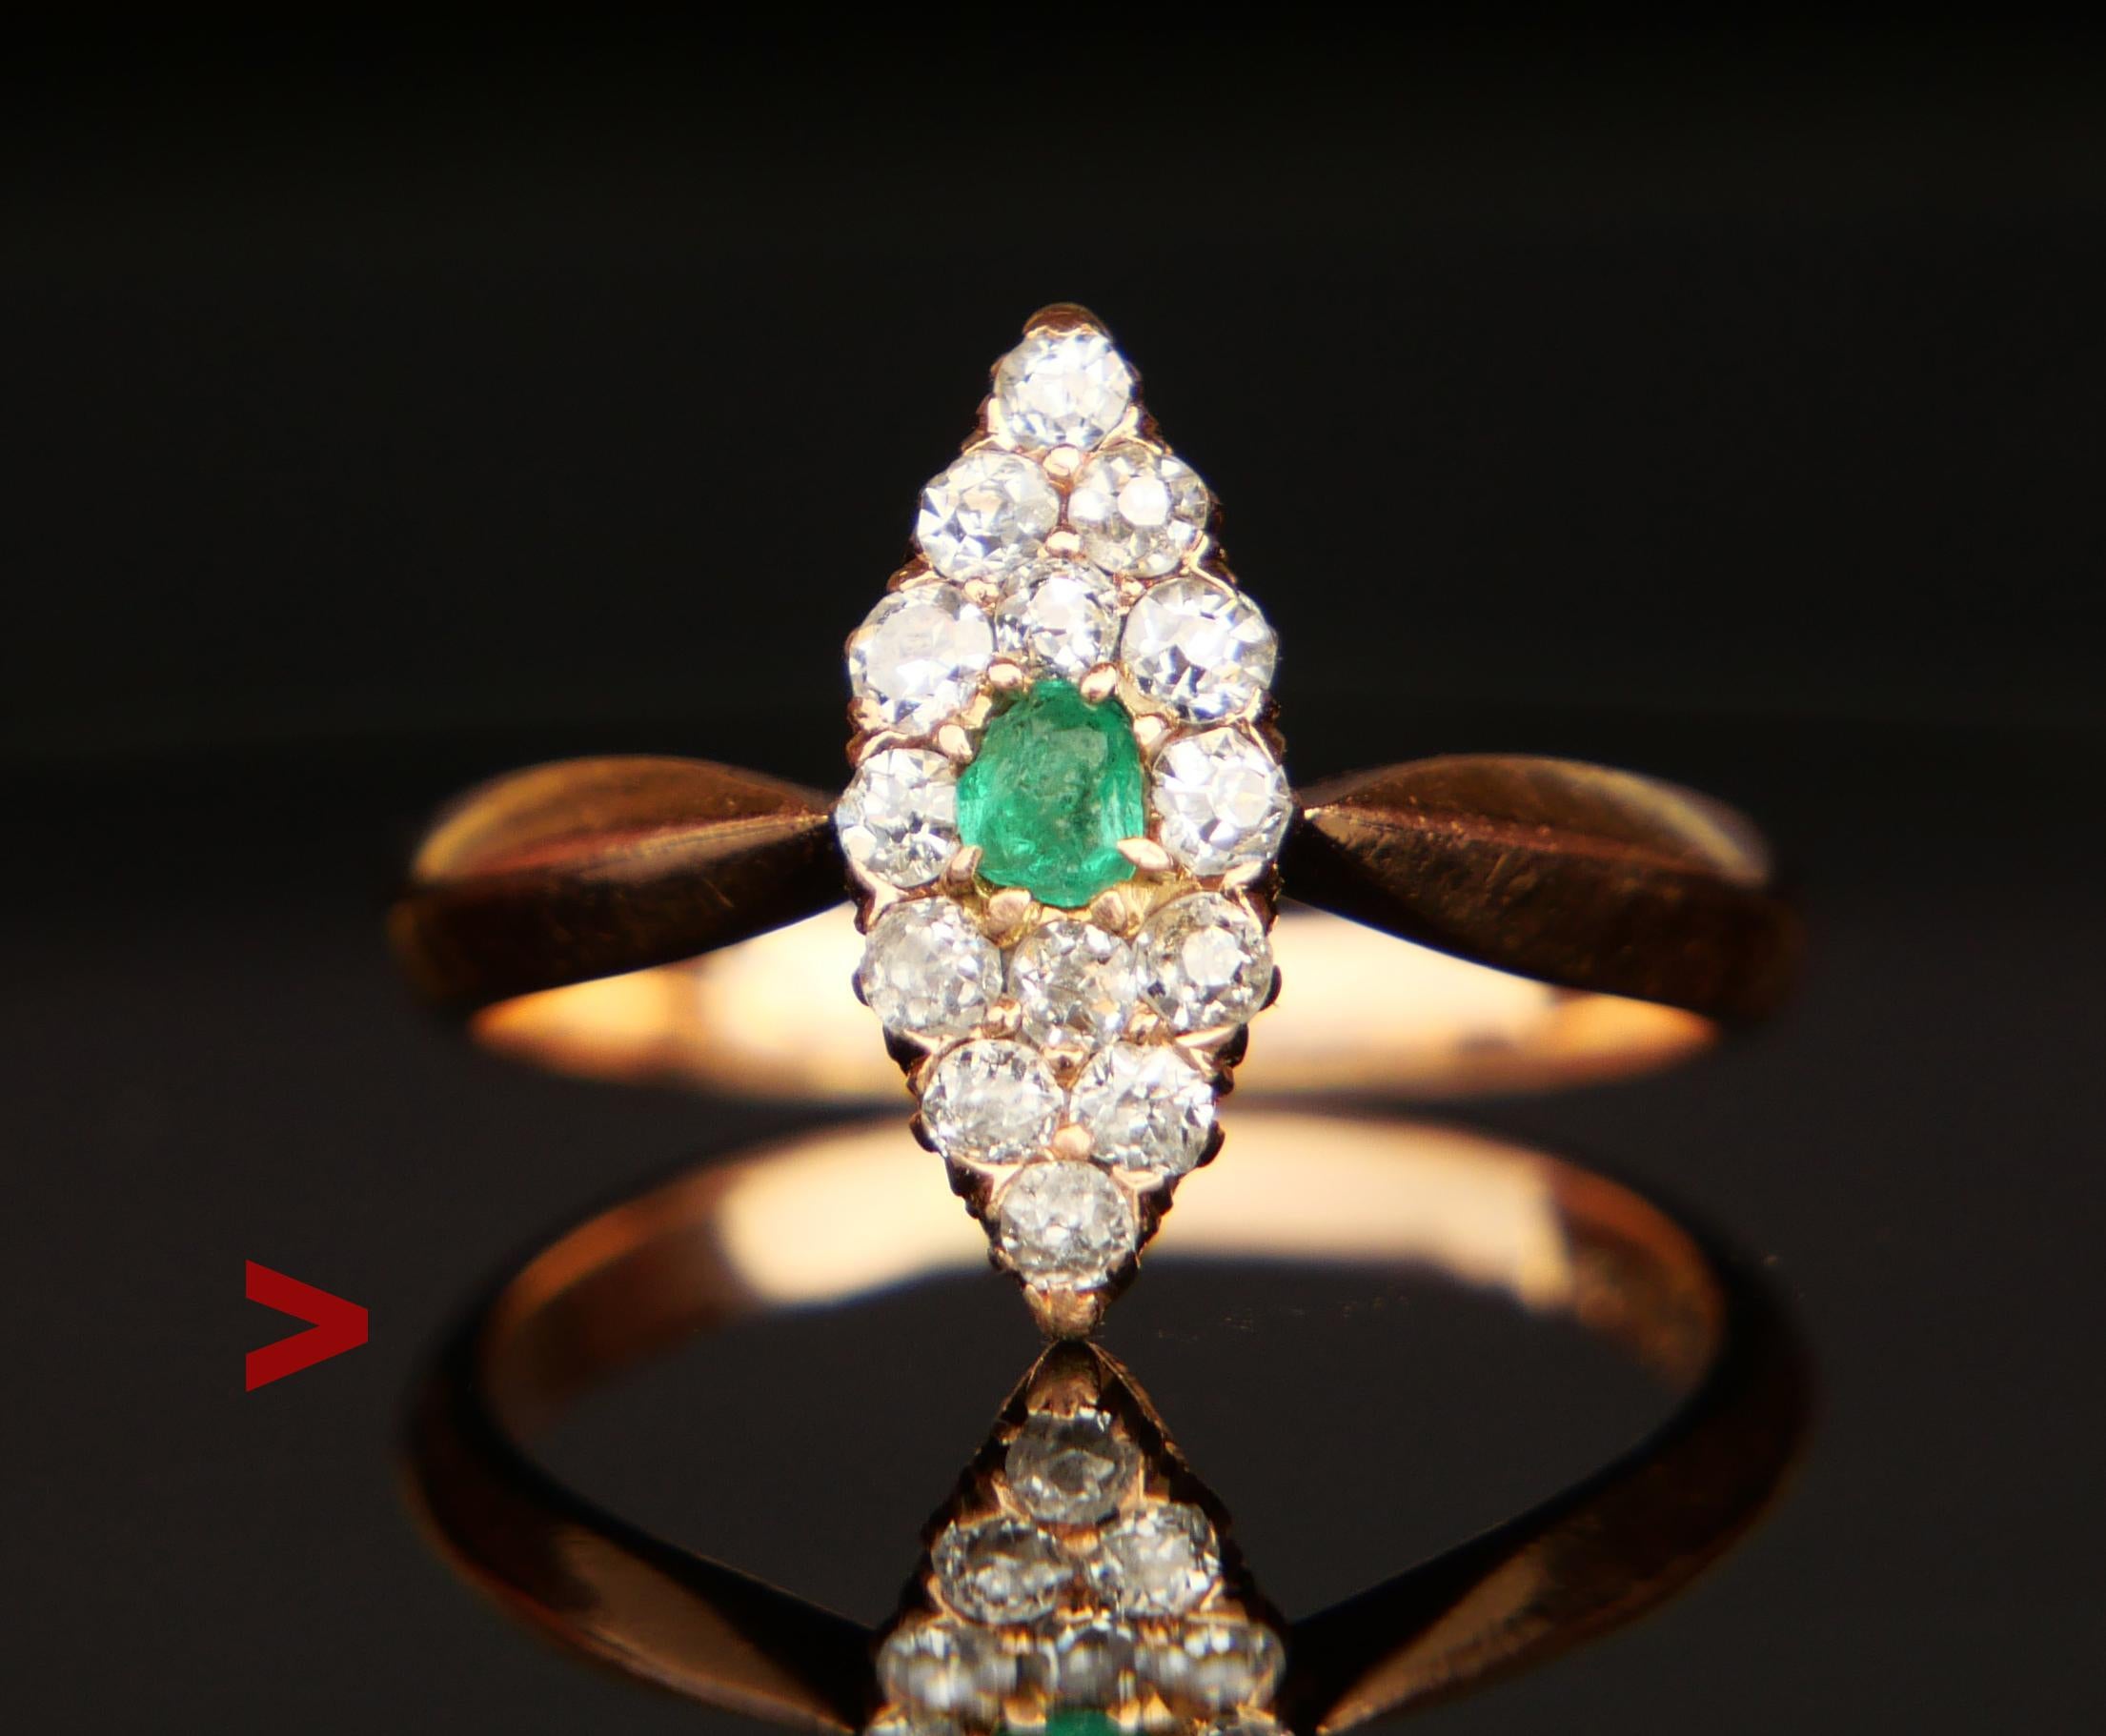 Art Deco period German Ring with Emerald and Diamonds.

Eye - shaped crown measures 14 mm x 6 mm x 5 mm deep. Emerald is oval cut 3 mm x 2.5 mm x 1.5 mm deep / ca. 0.15ct . There are 14 Diamonds of old European cut, of which 12 Ø 2 mm /0.04ct and 2